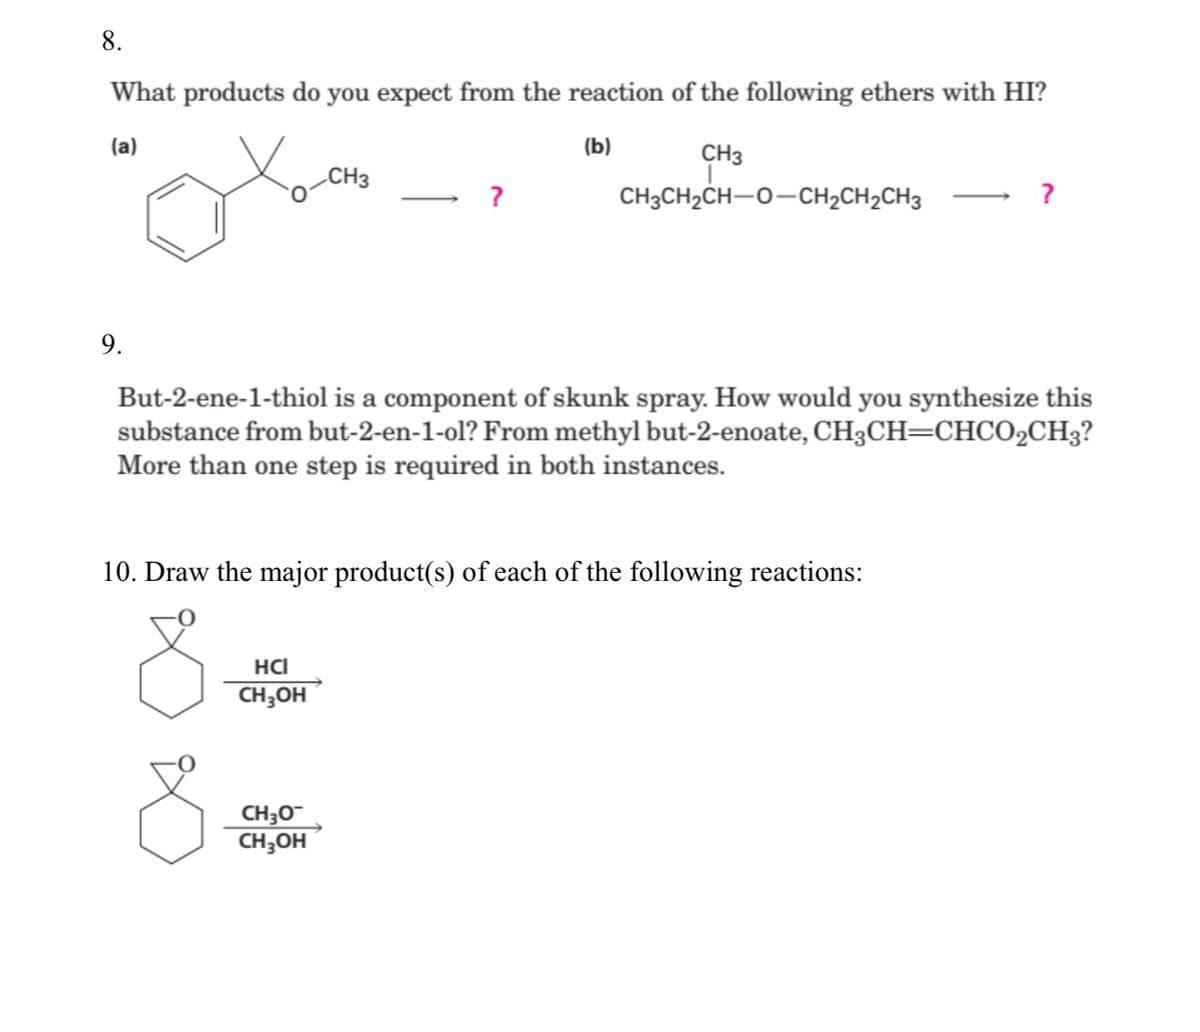 8.
What products do you expect from the reaction of the following ethers with HI?
(a)
(b)
CH3
CH3
CH3CH2CH-0-CH2CH2CH3
9.
But-2-ene-1-thiol is a component of skunk spray. How would you synthesize this
substance from but-2-en-1-ol? From methyl but-2-enoate, CH3CH=CHCO2CH3?
More than one step is required in both instances.
10. Draw the major product(s) of each of the following reactions:
HCI
CH;OH
CH3O
CH;OH
